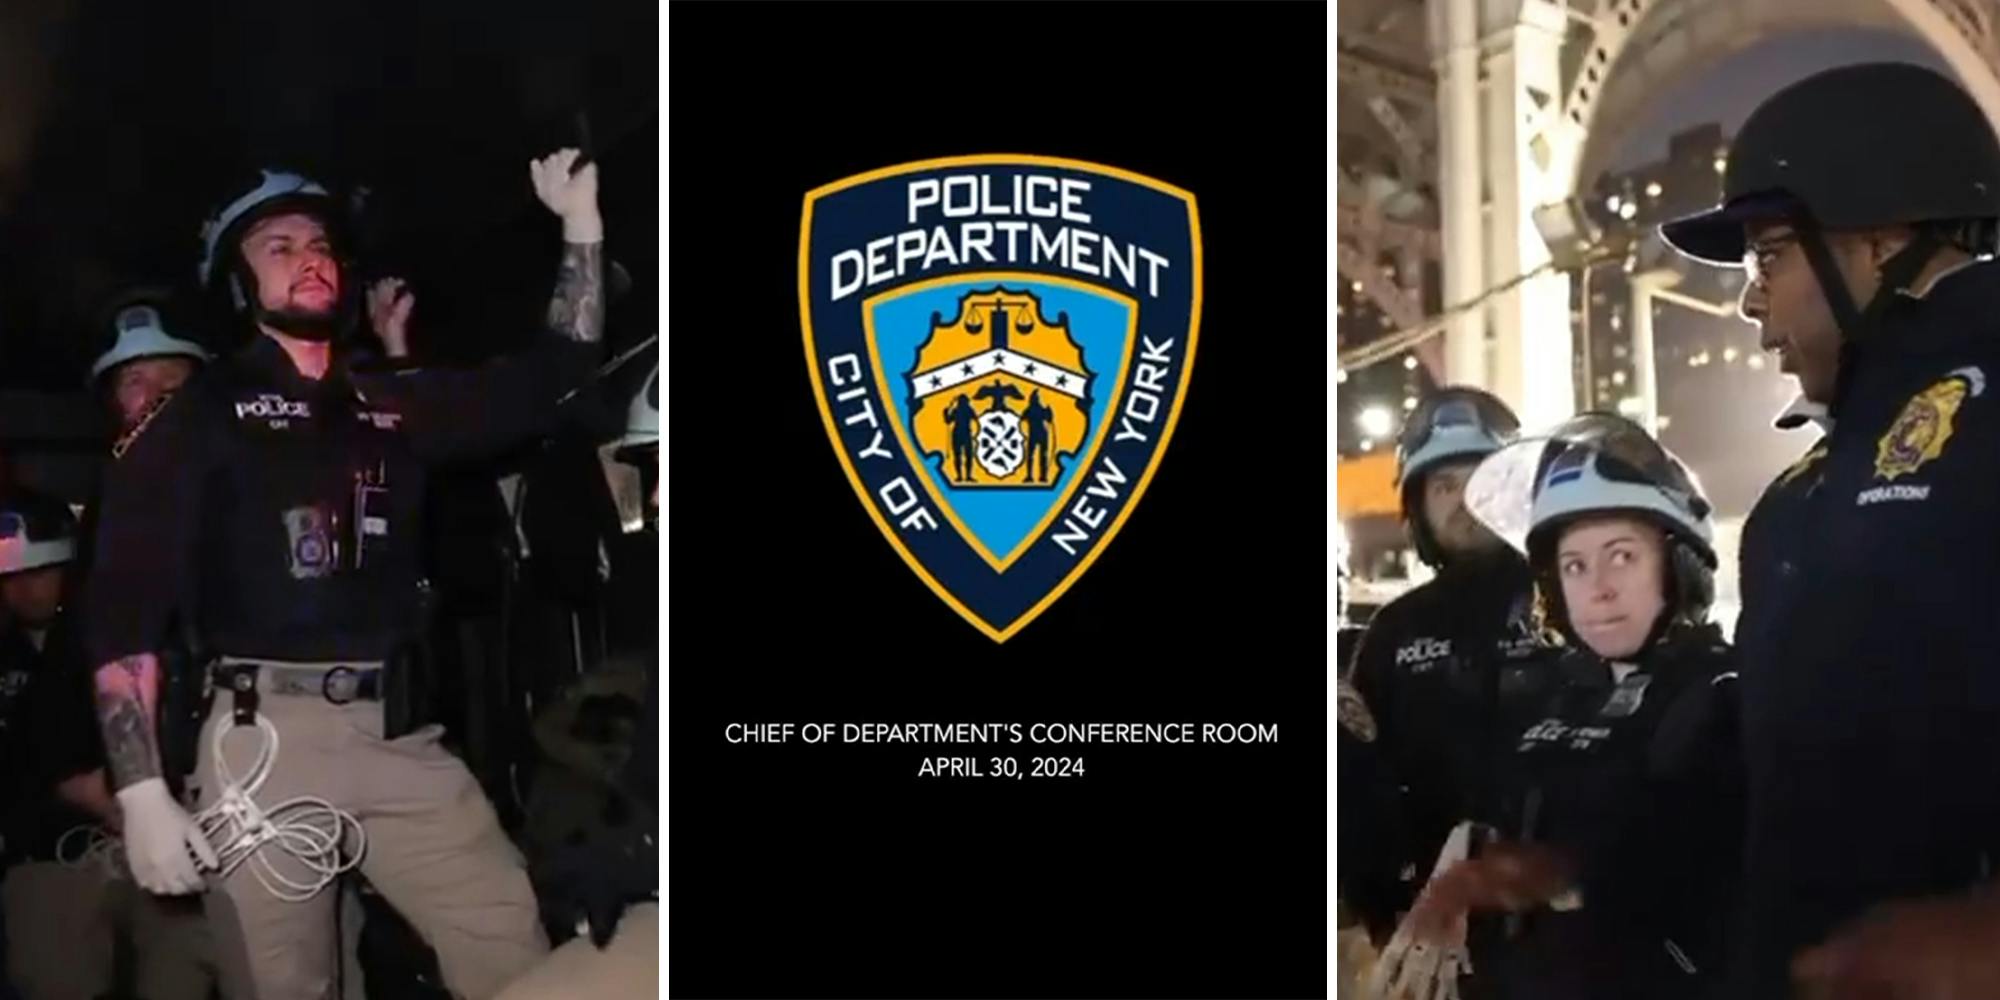 NYPD video about "restoring order" on college campuses panned online